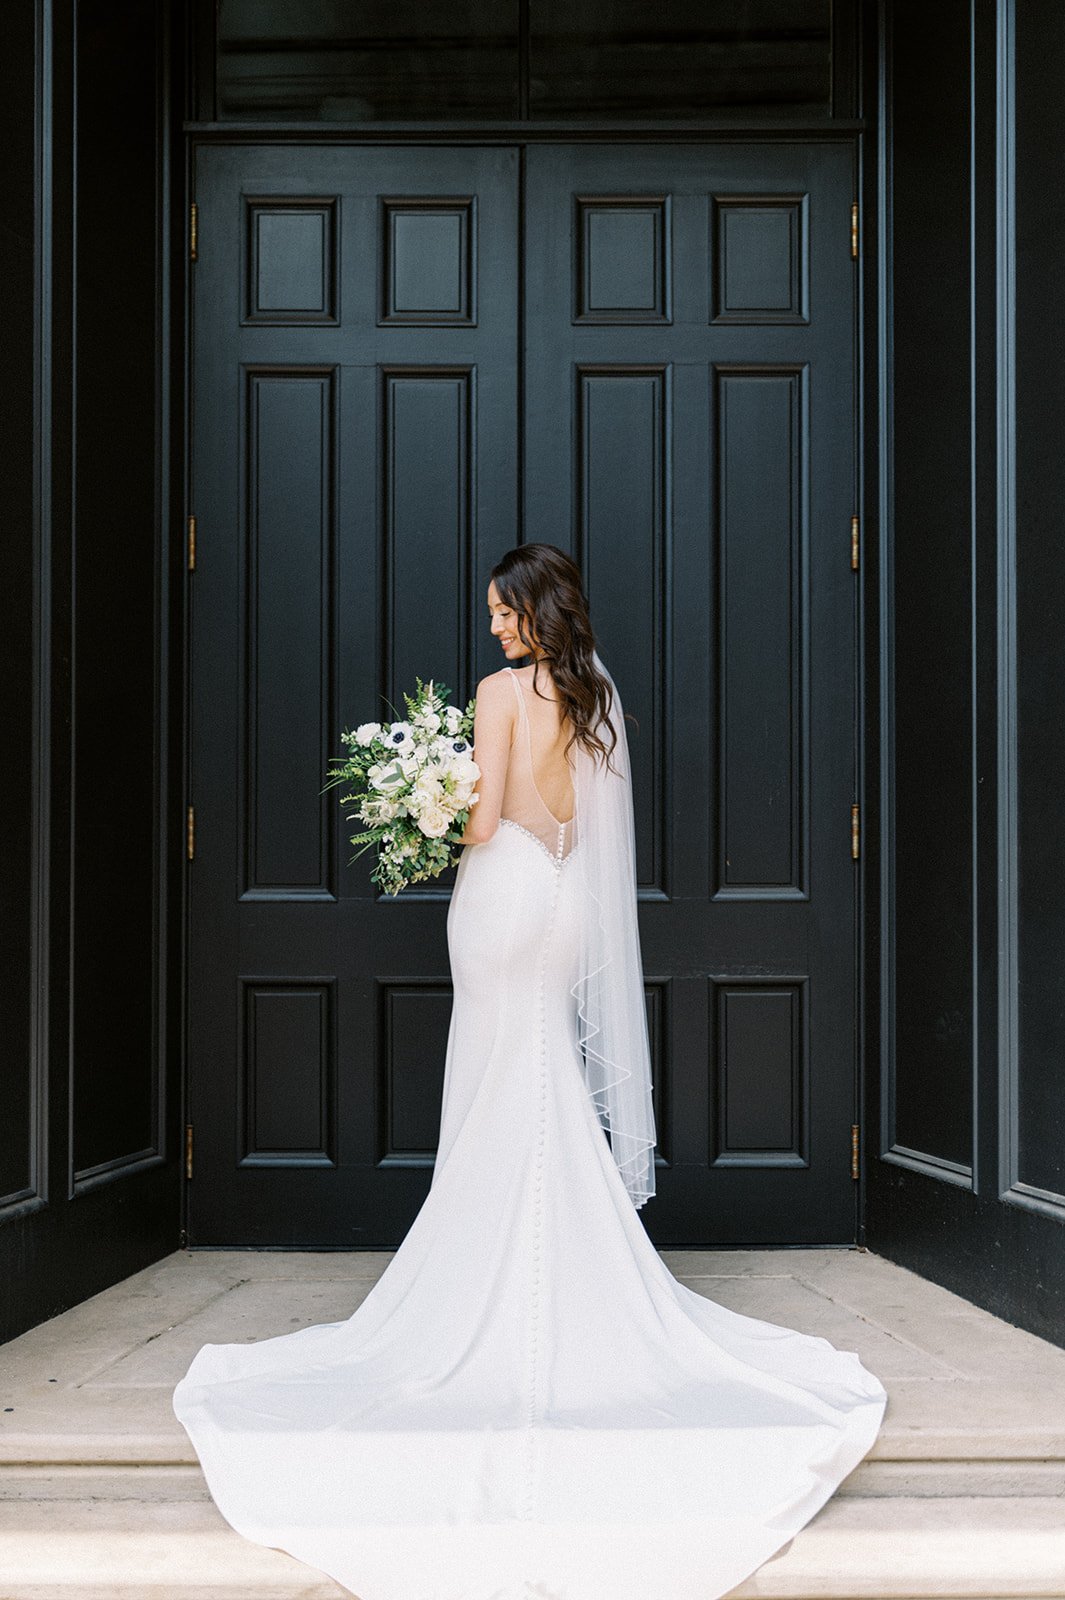 Bride posing in front of black exterior doors with white bouquet in hand